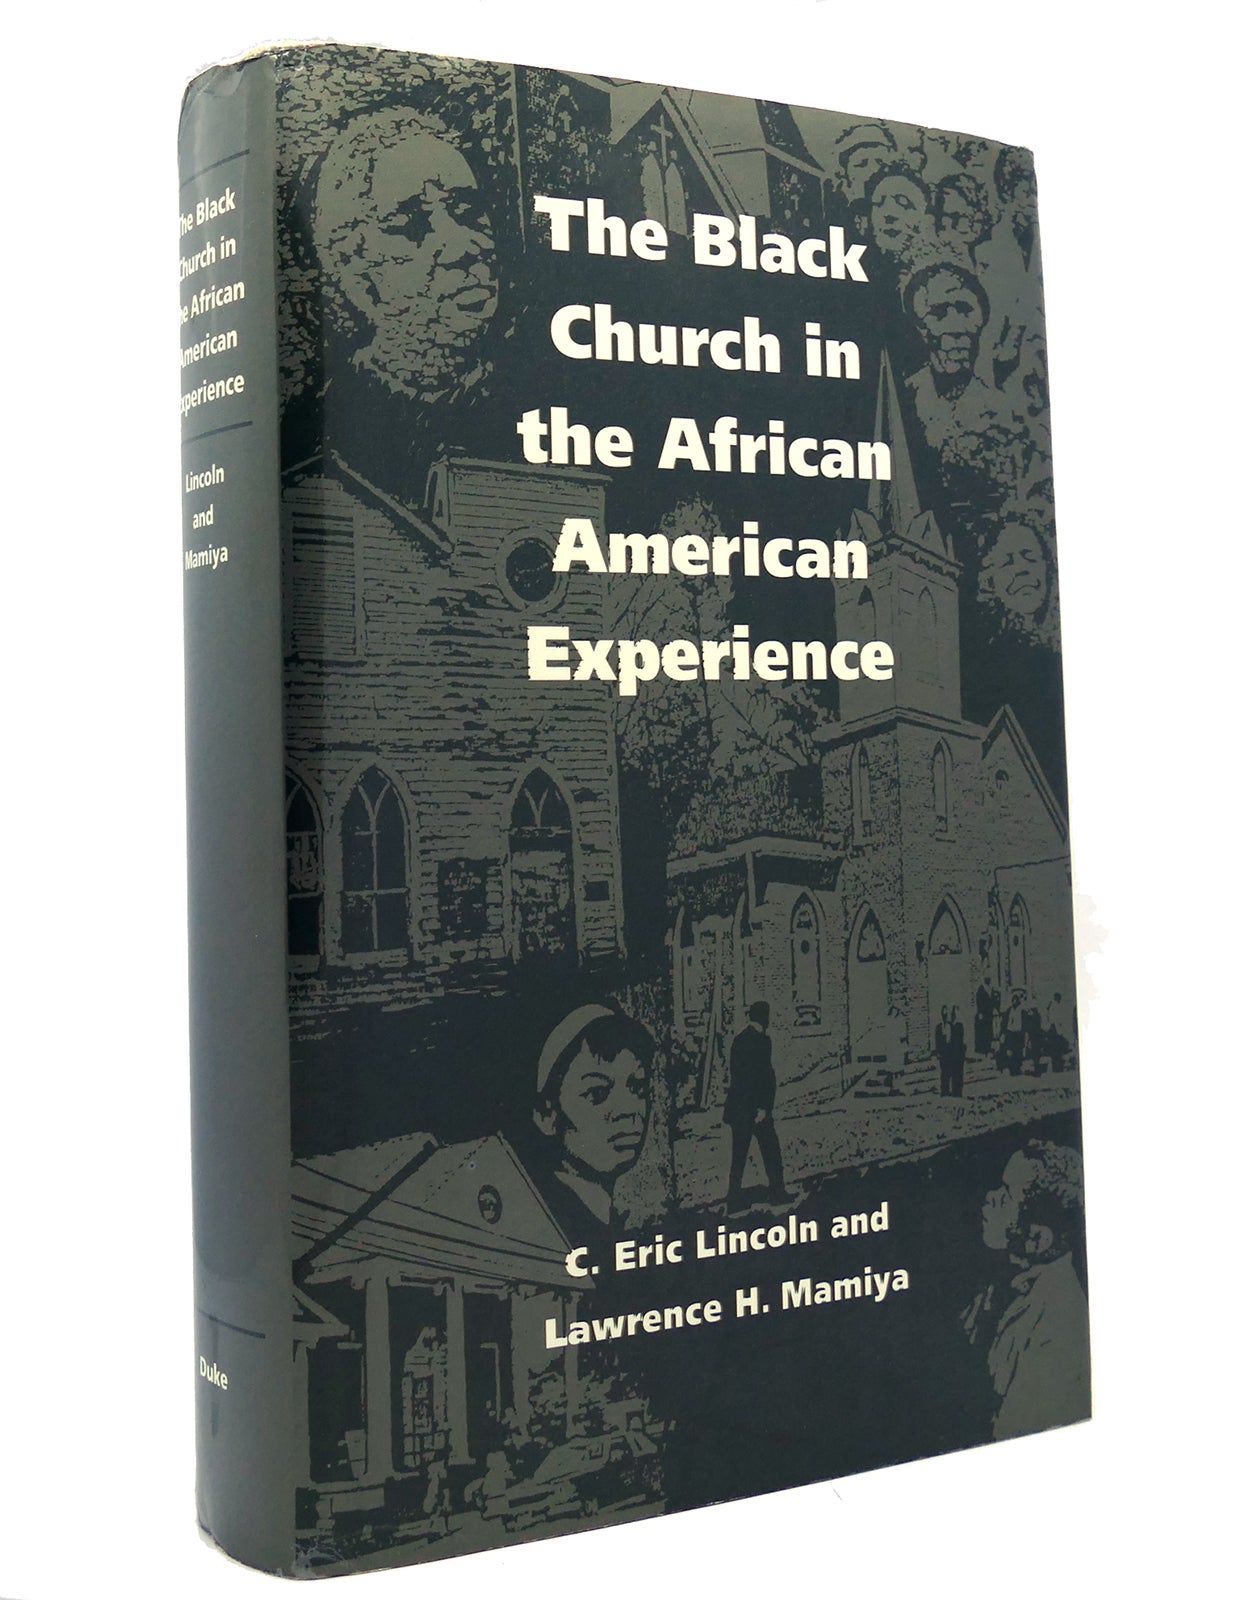 THE BLACK CHURCH IN THE AFRICAN-AMERICAN EXPERIENCE. C. Eric Lincoln.